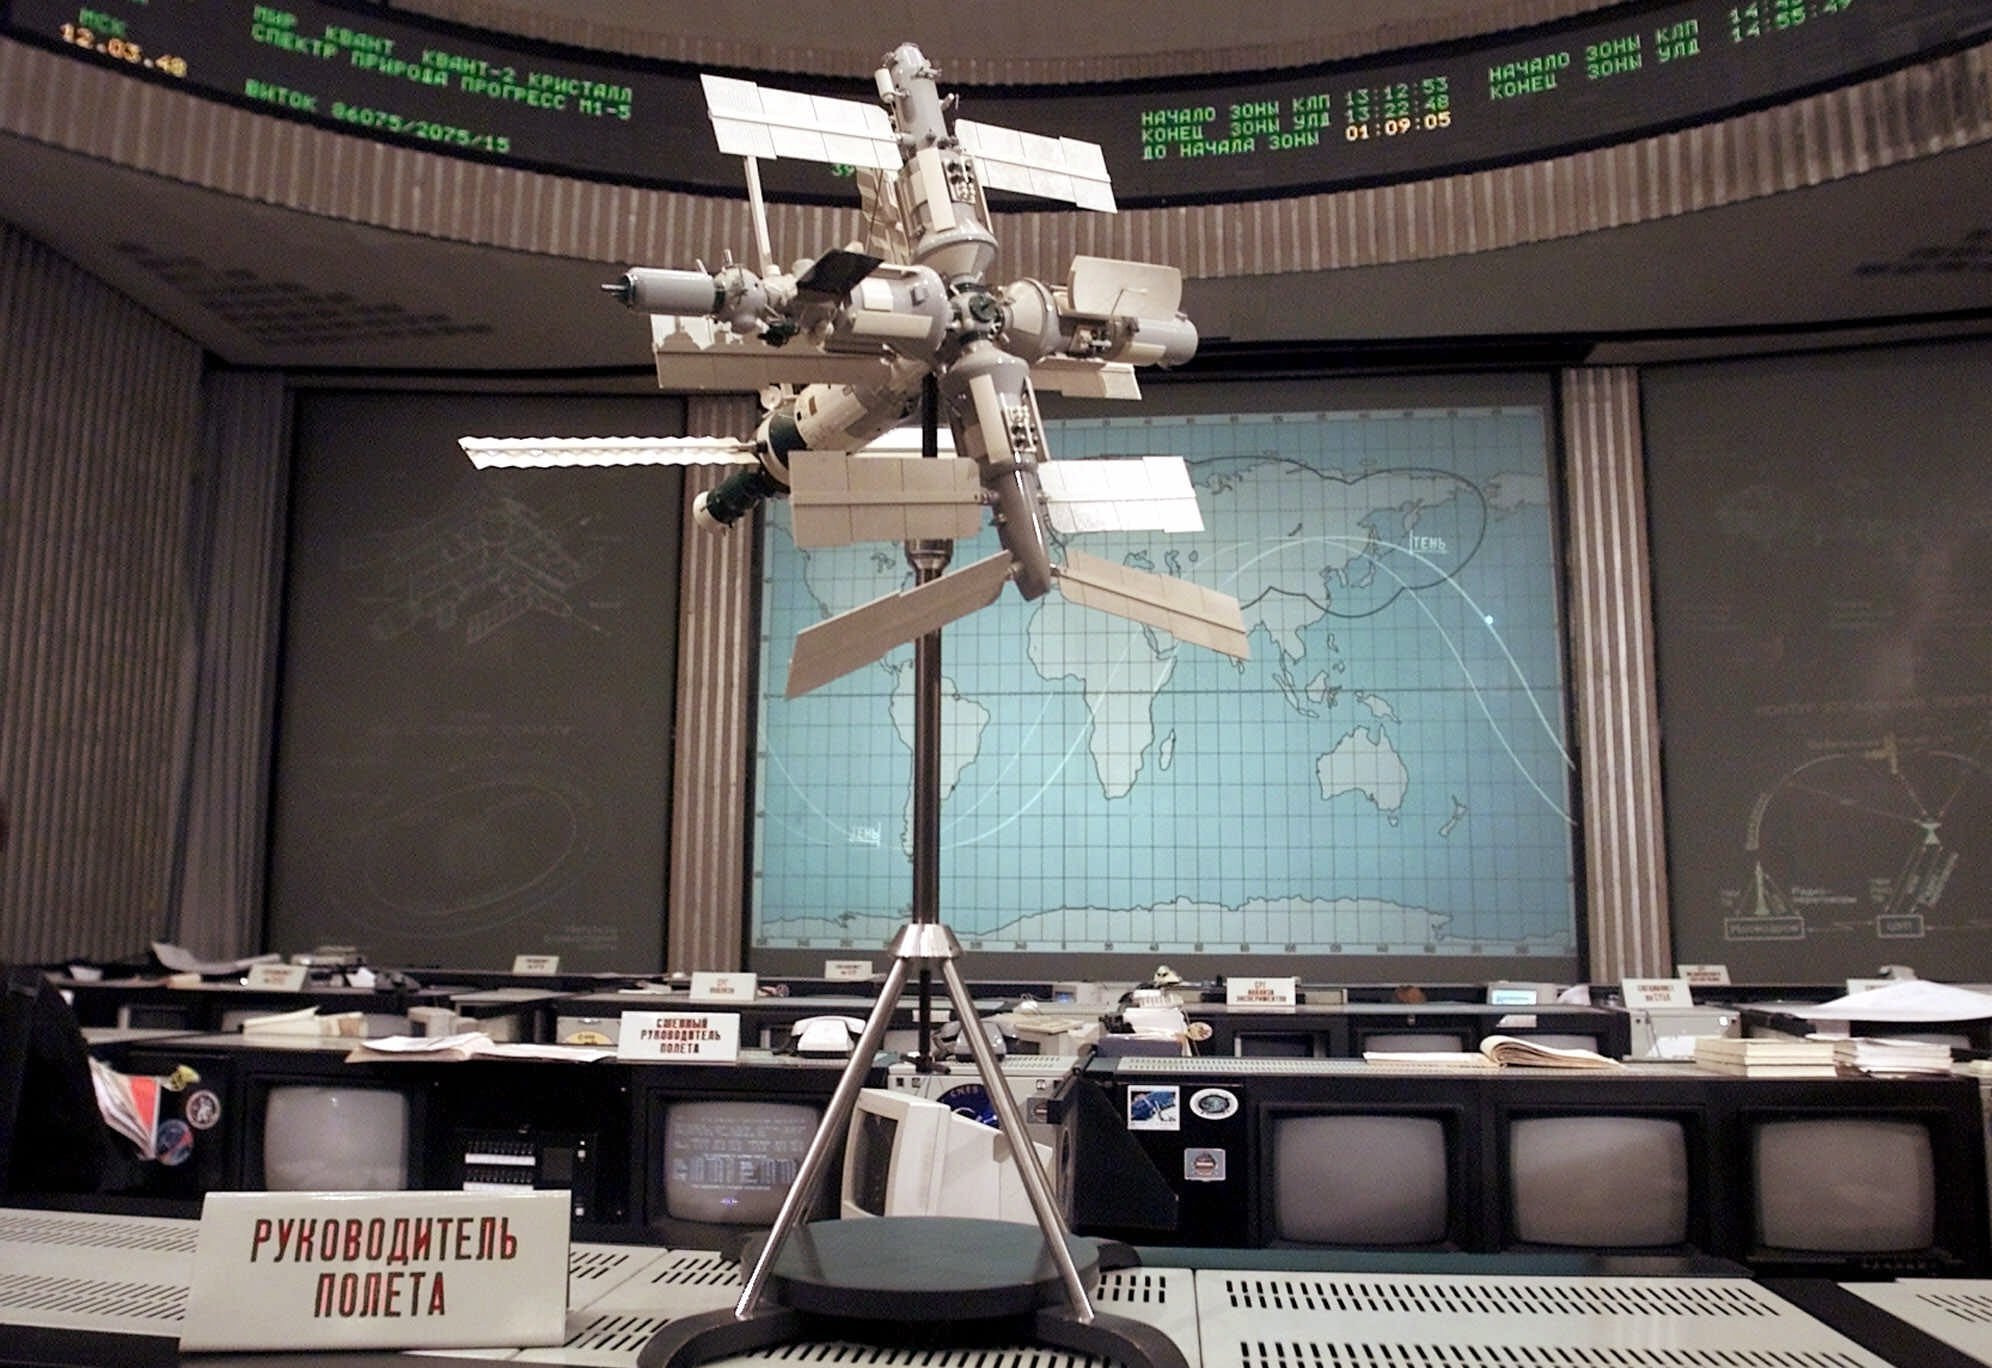 A scale model of the Mir space station stands in its Mission Control center, at Korolyov, outside Moscow on March 7, 2001. Russian space officials set March 20 as the date for dumping the Mir space station, saying they want to wait until the craft drifts closer to Earth before giving it the final shove toward a fiery plunge into the Pacific Ocean.